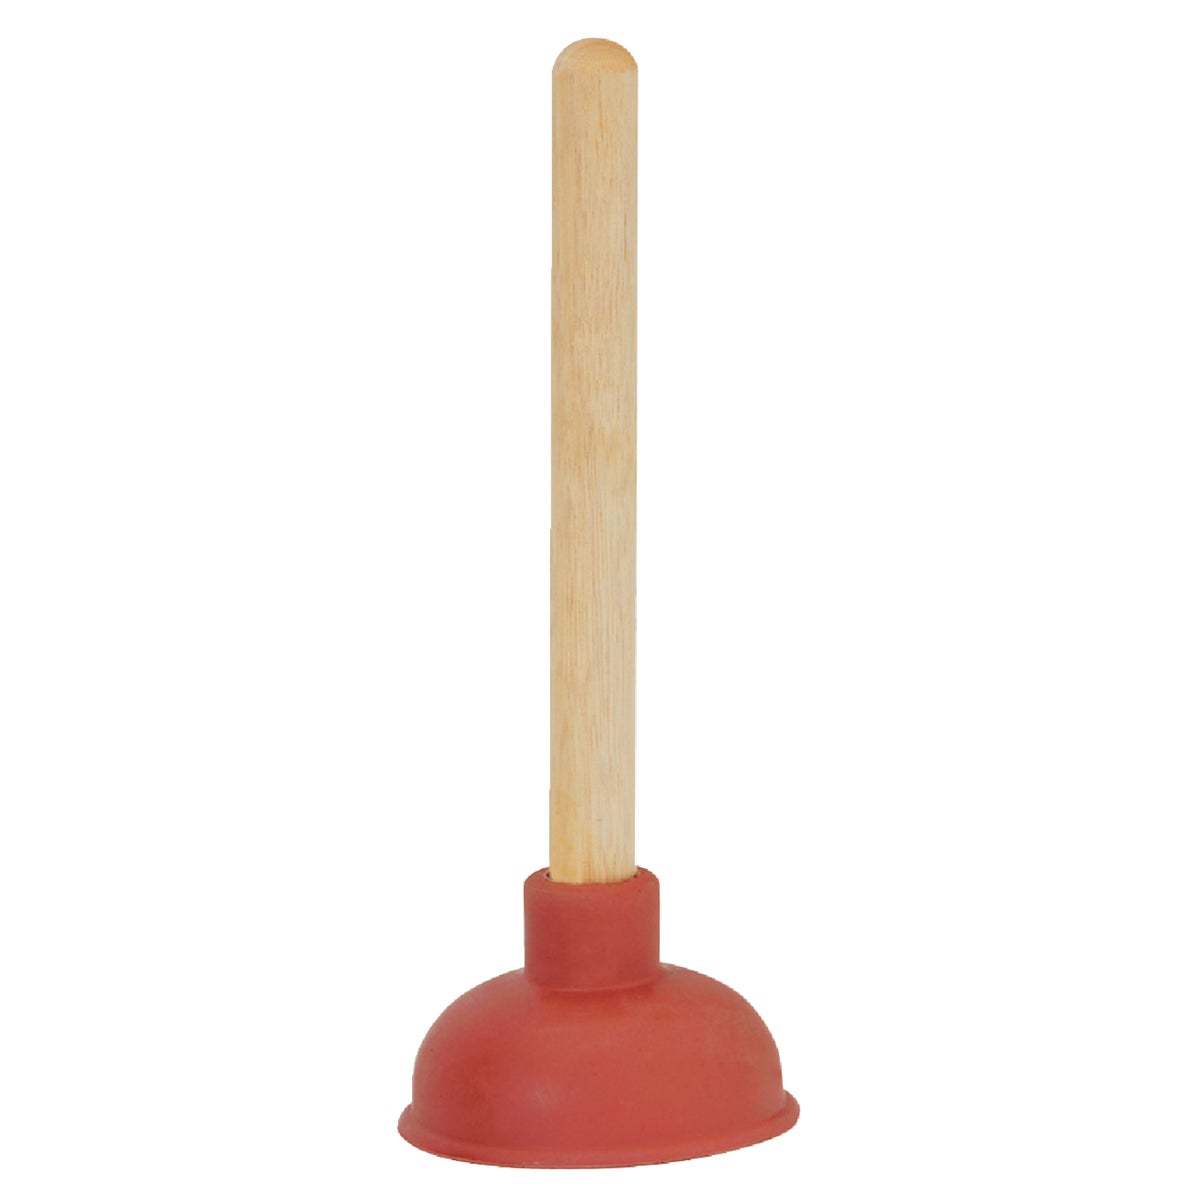 Item 415713, Heavy-duty, red rubber force cup will not harden or crack.